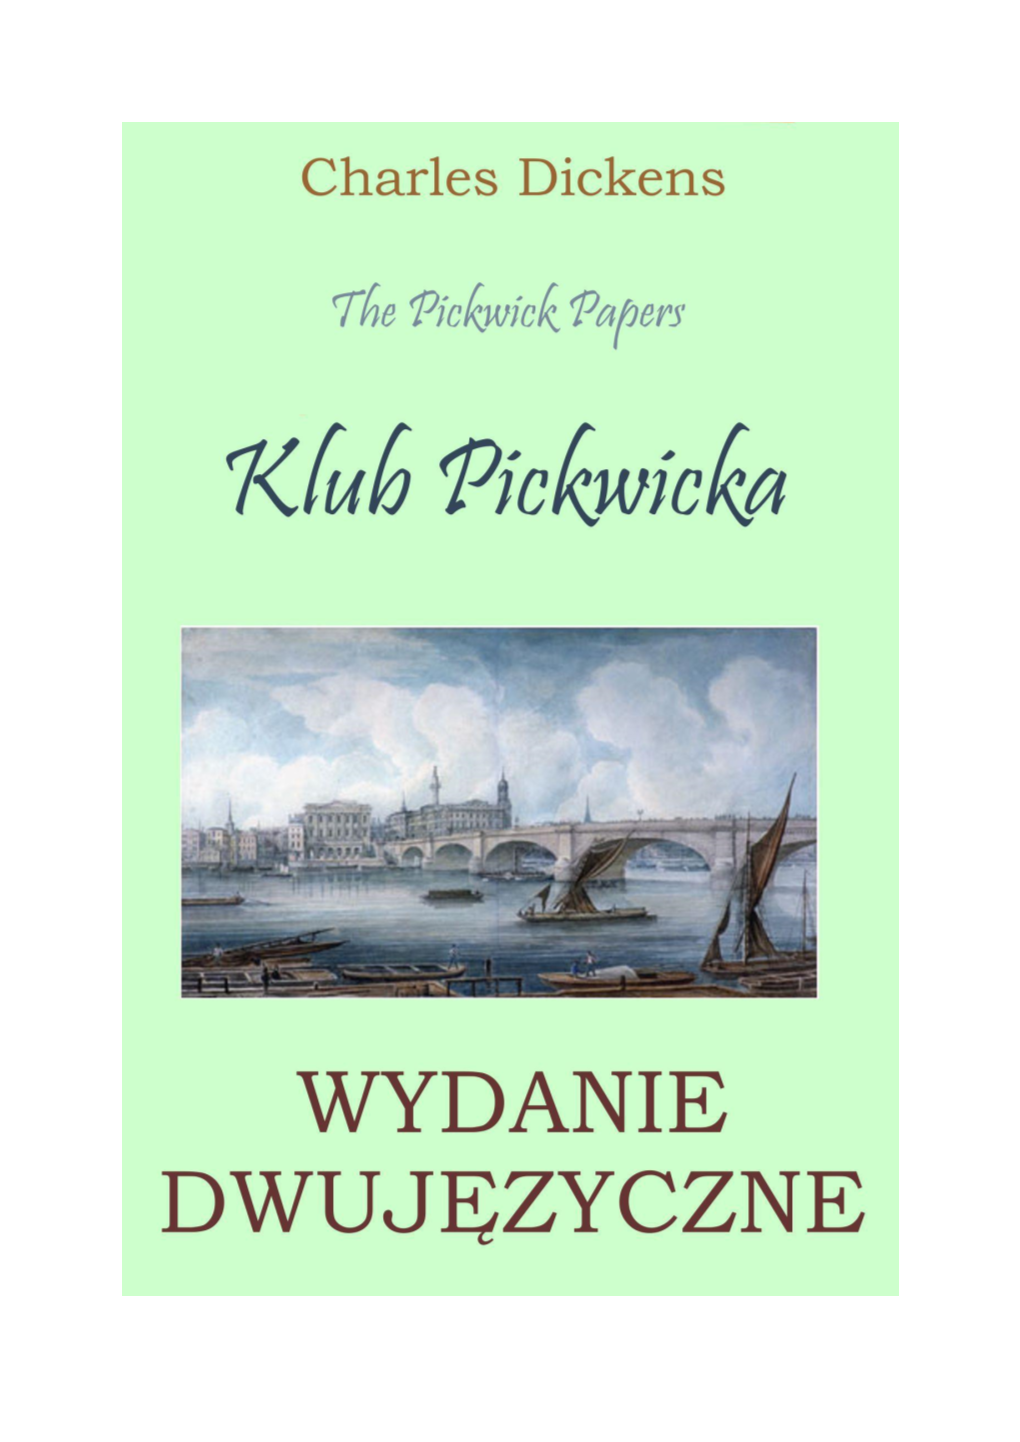 The Pickwick Papers * Klub Pickwicka